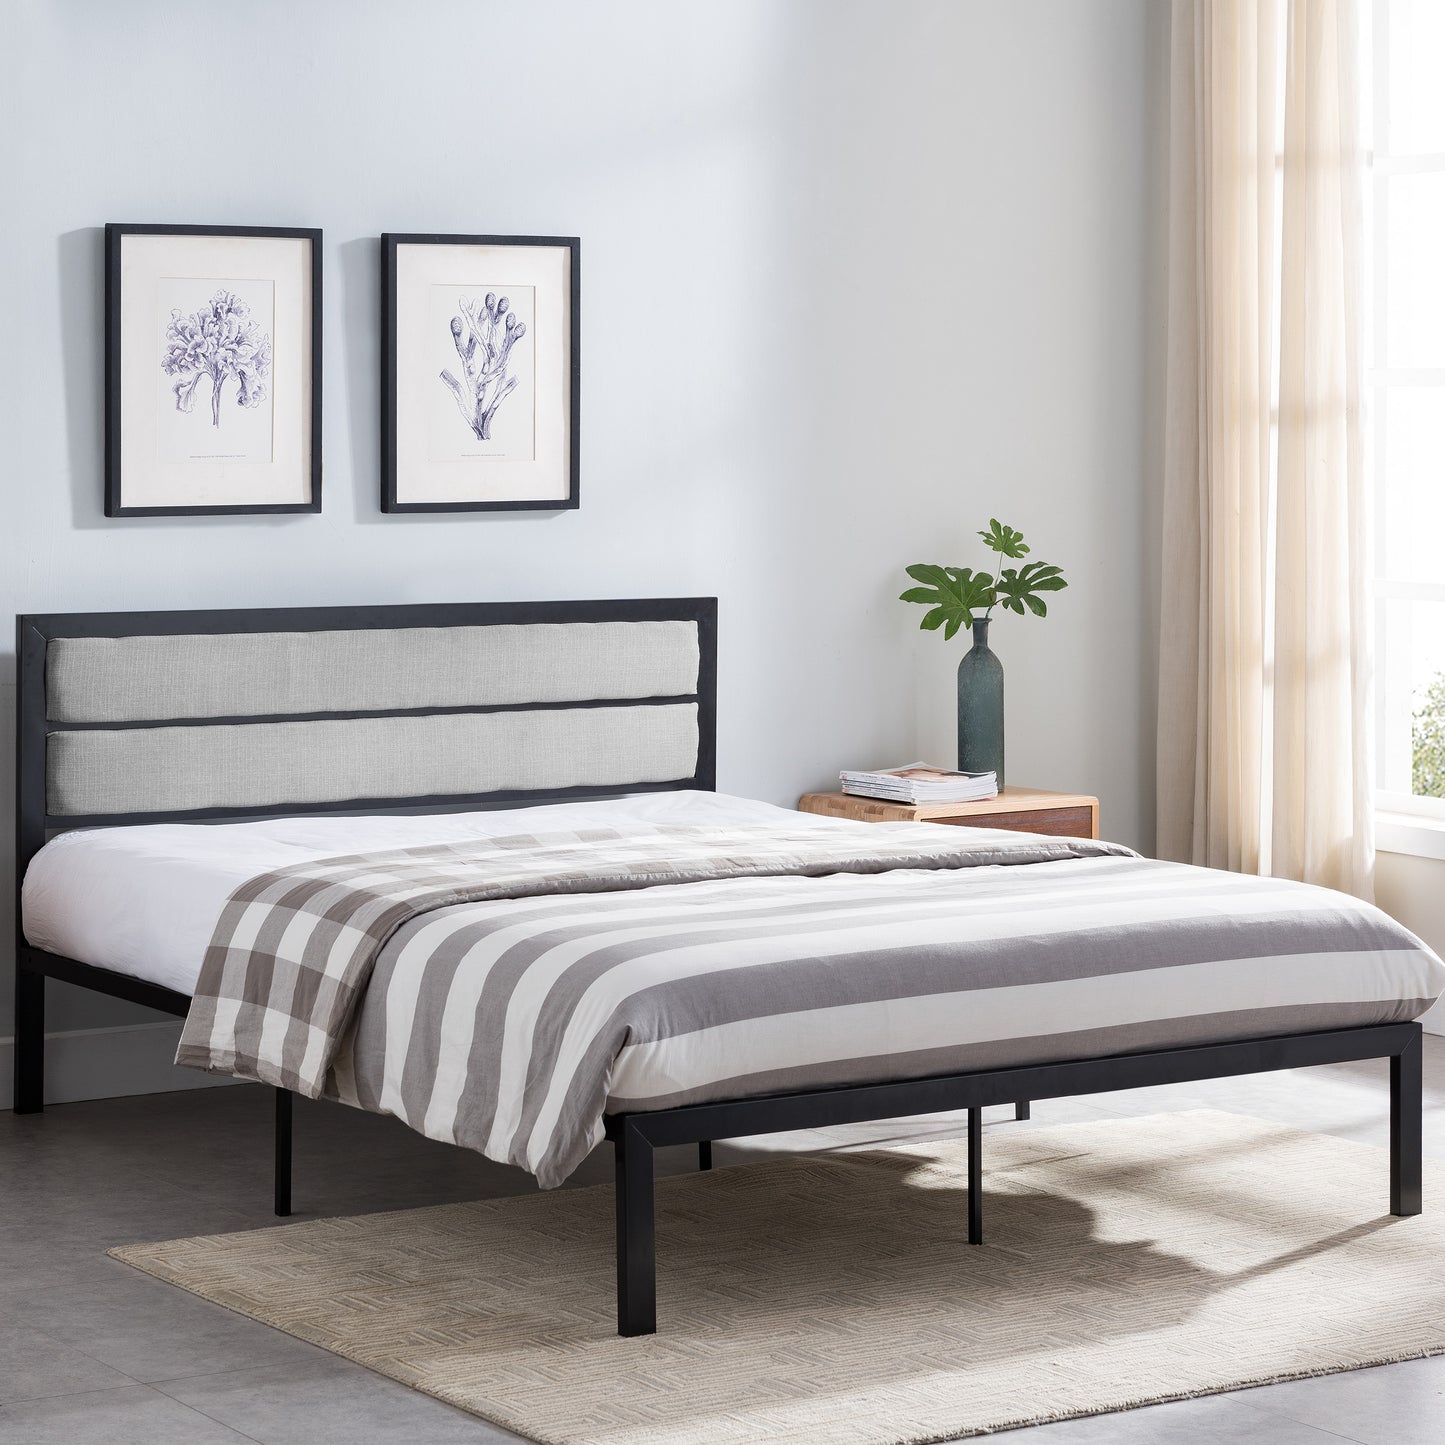 Kiran Minimalistic Modern Iron Queen Bed Frame with Fabric Upholstered Headboard